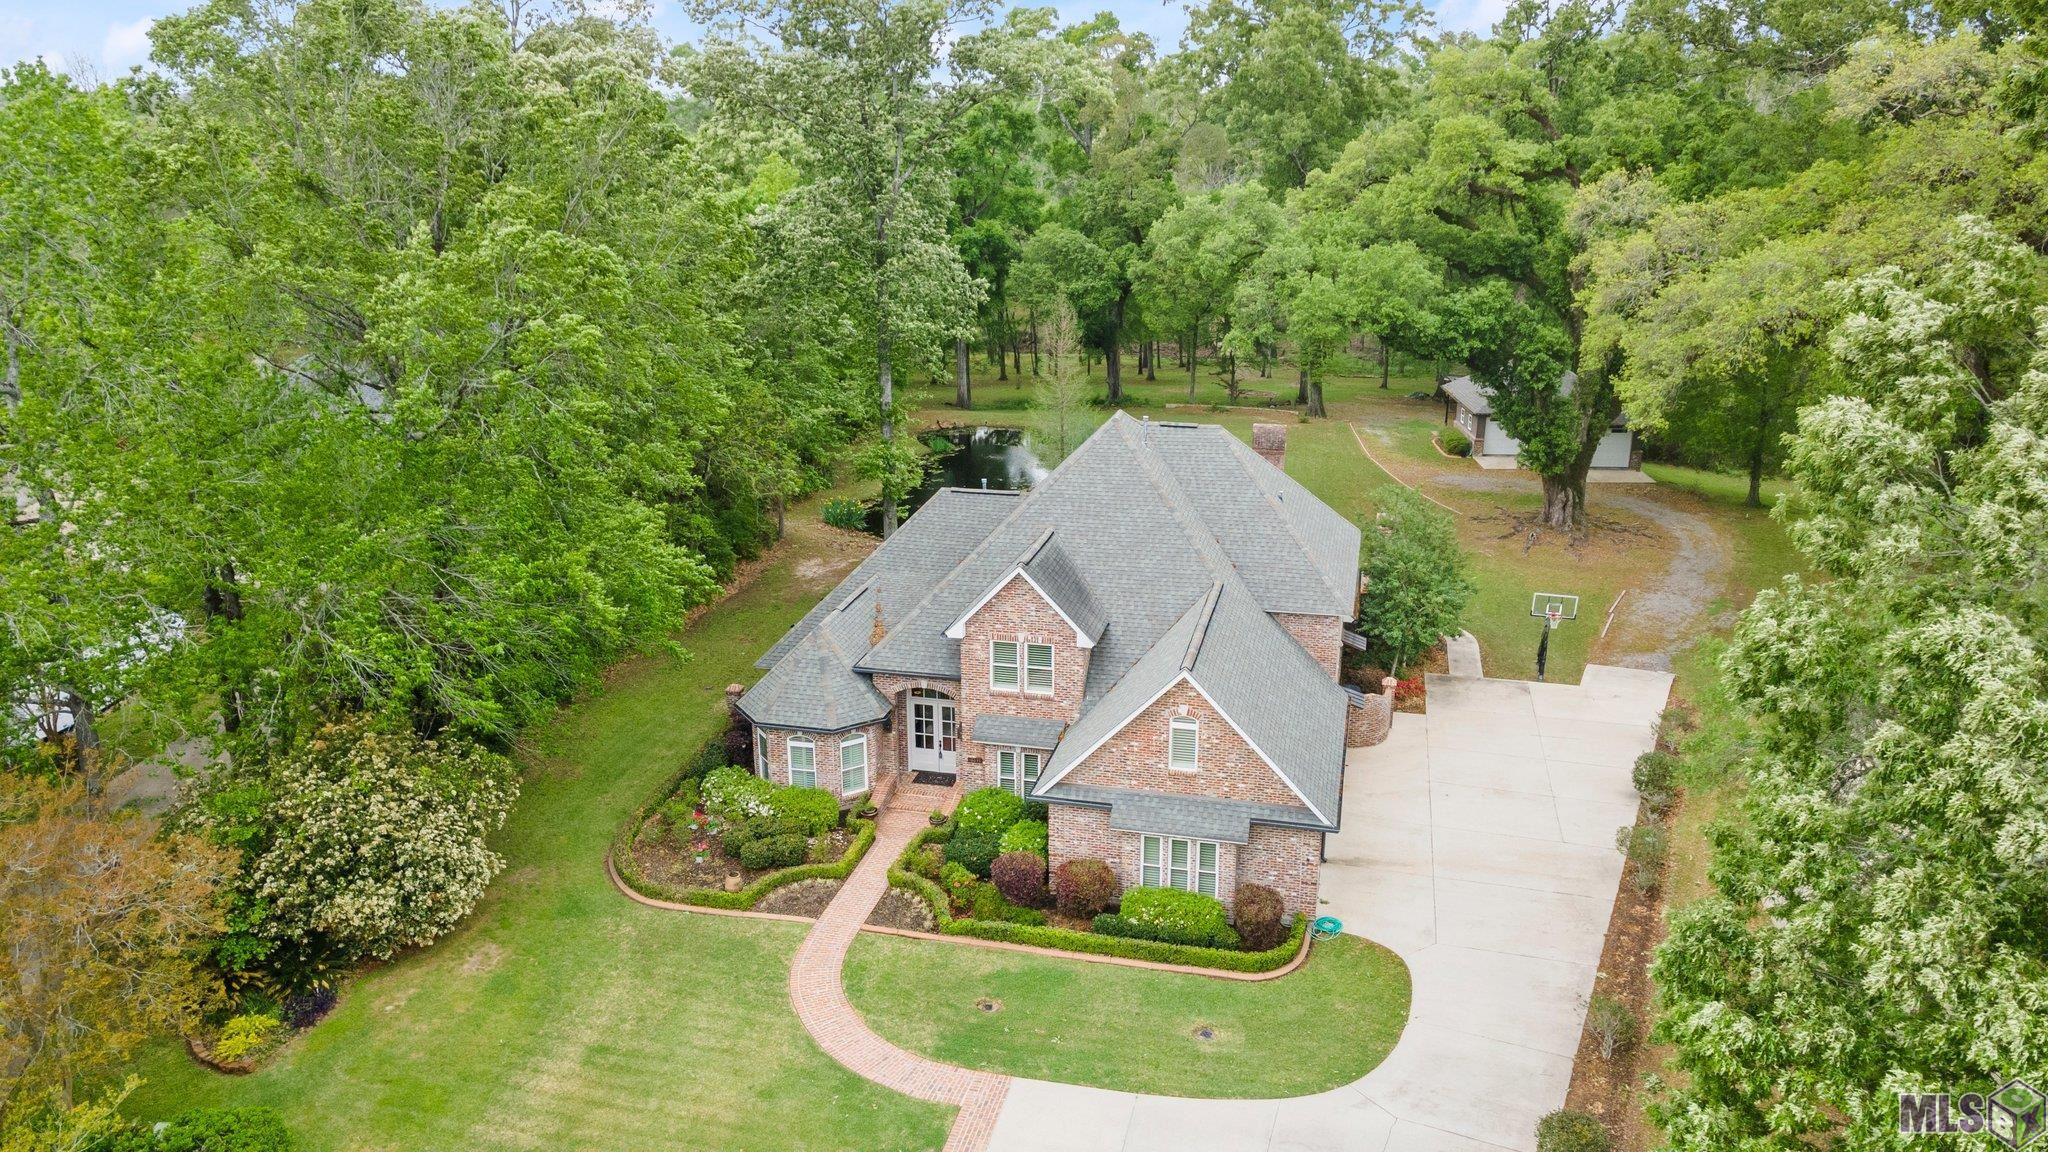 Welcome home to custom, serene estate in the middle of the city. This 1 owner home sits on 2.87 picturesque acres. The back of the property sits on Bayou Manchac at the back of The Country Club of Louisiana. Some of the property's many features include: a whole home generator, pond, outdoor fireplace, 732sqft shop with bathroom & porch, storage area behind shop, partially wooded in rear, Bayou Manchac, ample parking, and 1,600sqft of concrete (covered and not covered) outdoor entertaining area! Upon entering the home, one cannot help but notice the 12ft foyer ceiling. The home first floor of the home is sure to wow! The first floor features Open living and dining areas for entertaining while featuring a triple split floor plan for privacy at every turn! The first floor also features a guest bedroom with attached bath, wet bar, mud room, sprawling laundry room, private study with wood barn doors, half bath for guest, built-in entertainment case, floor to ceiling windows, central home vacuum system, AMPLE storage, DUAL bathrooms in the primary suite and so much more! Upstairs features two bedrooms, 1.5 bathrooms, a game room, and bonus room with a closet! A true must see! Call today to schedule your private showing of this one of a kind property!